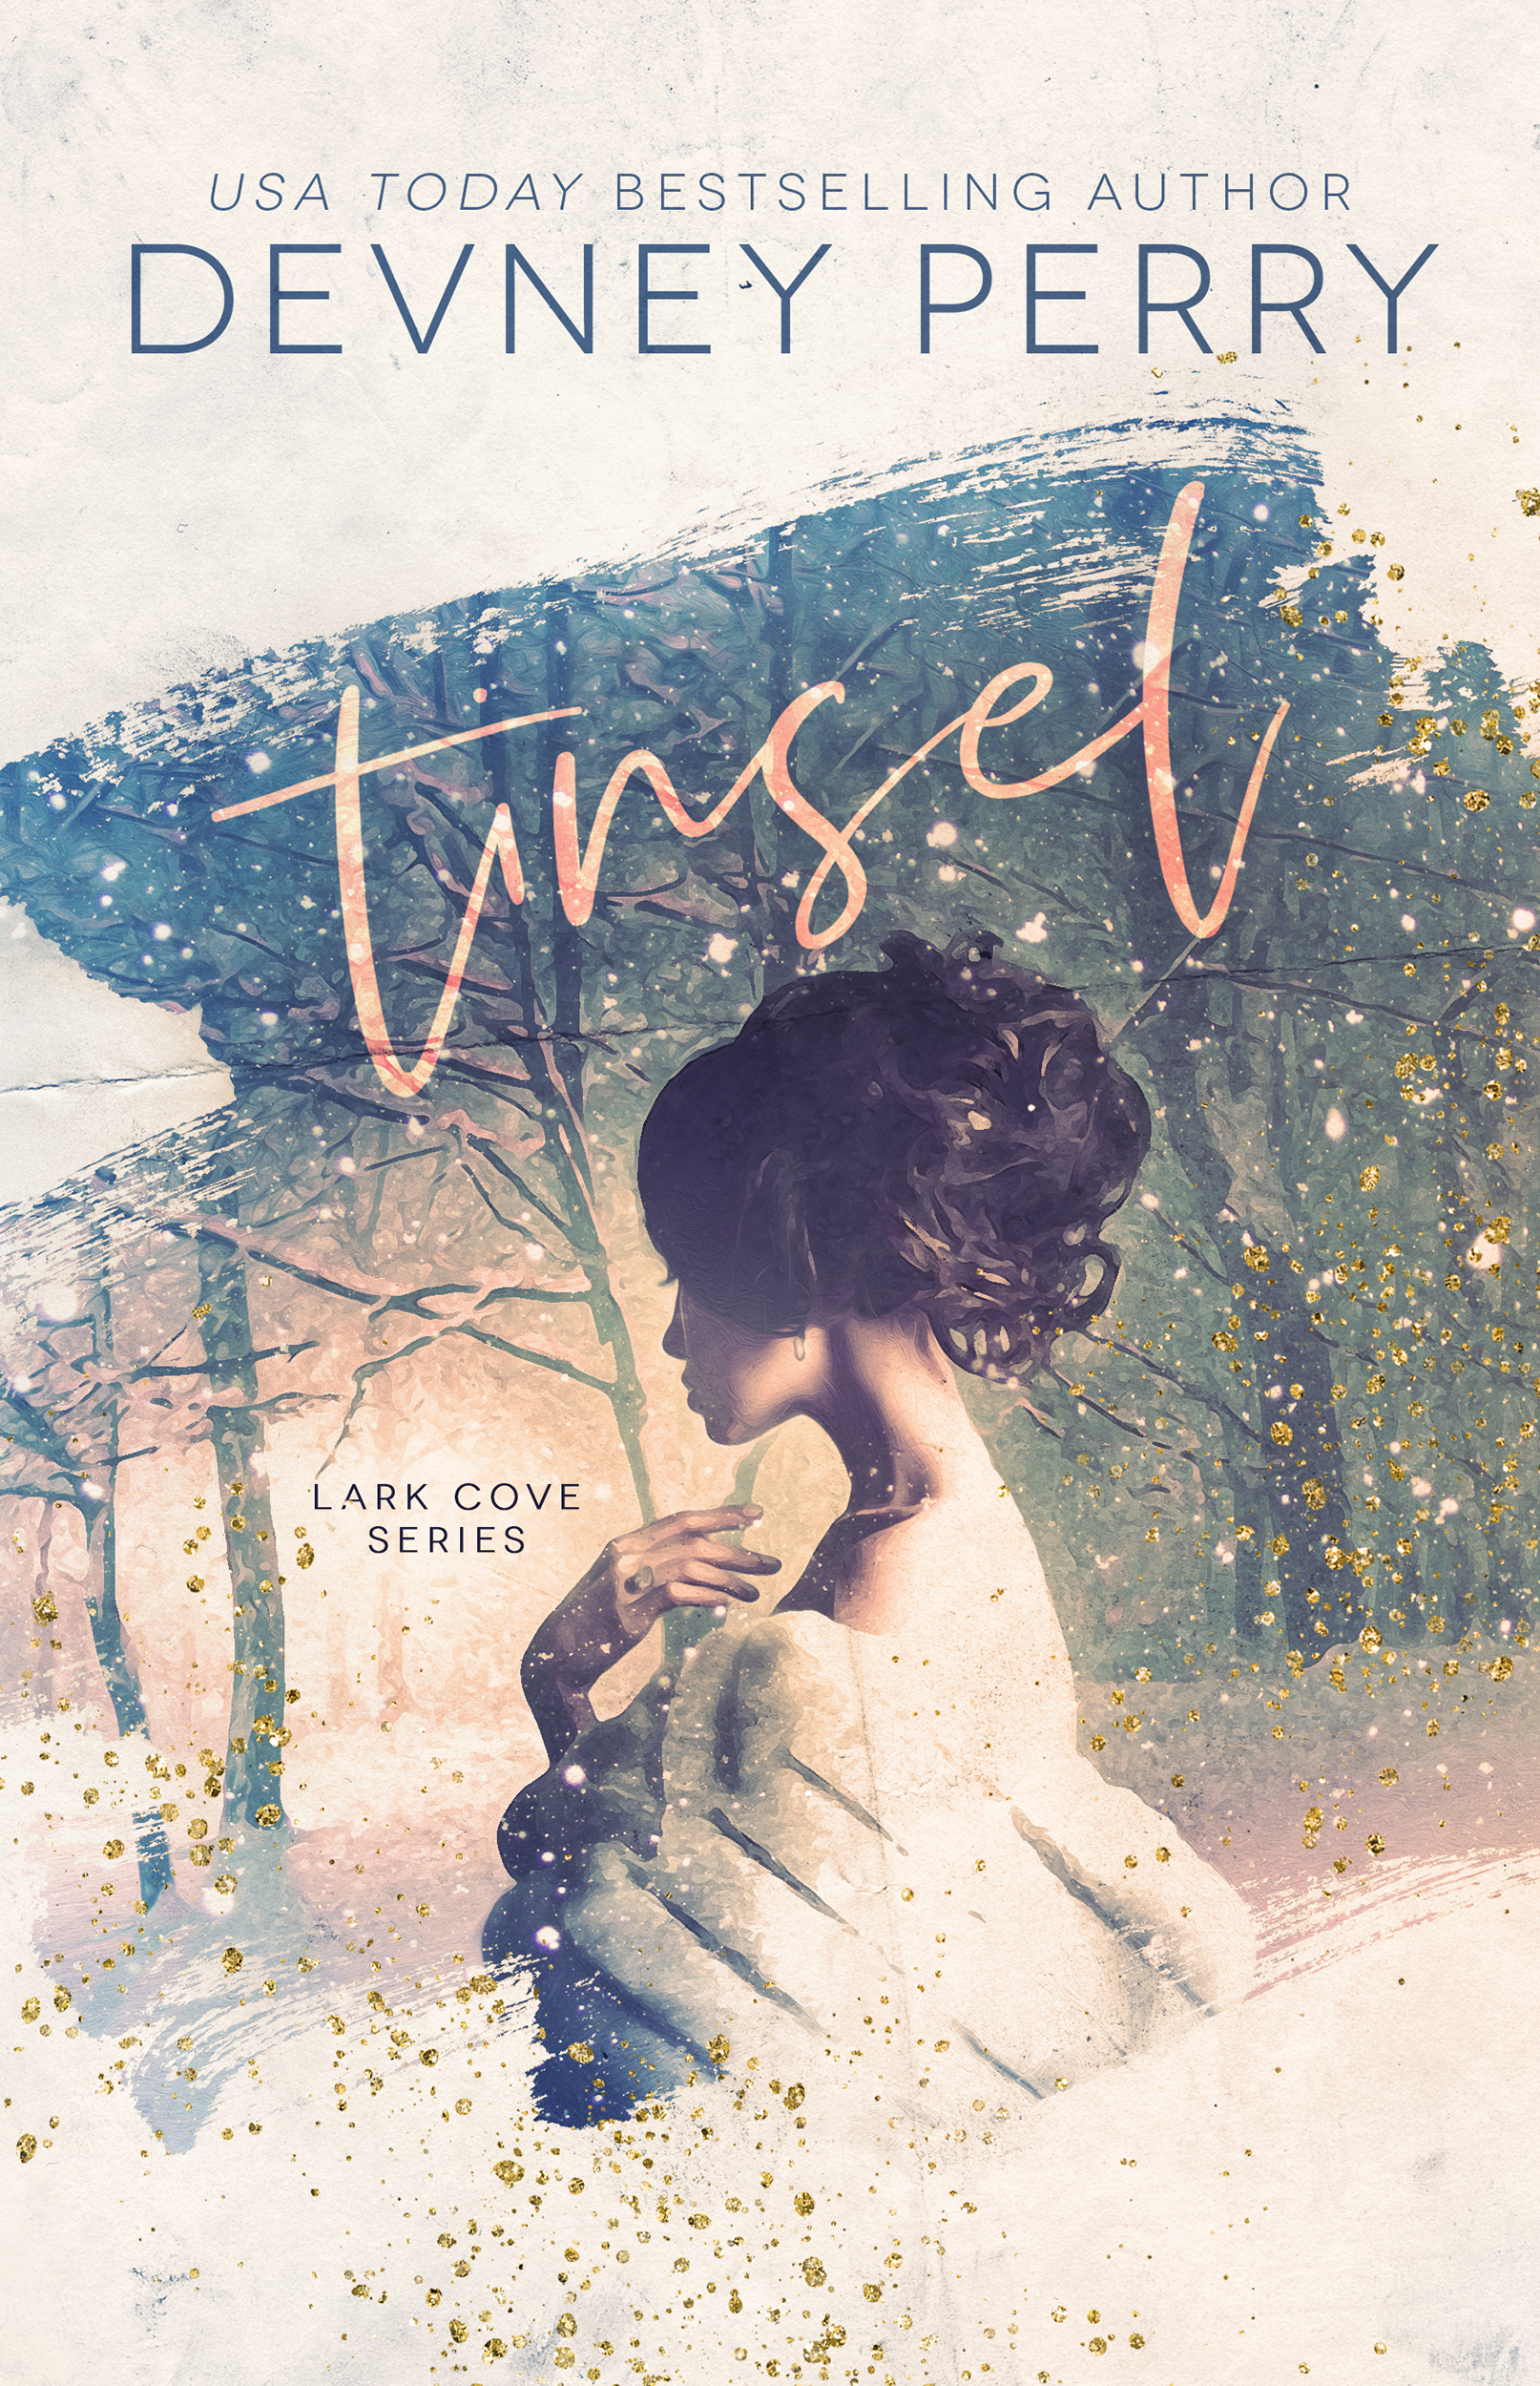 Tinsel by Devney Perry [Release Blitz]